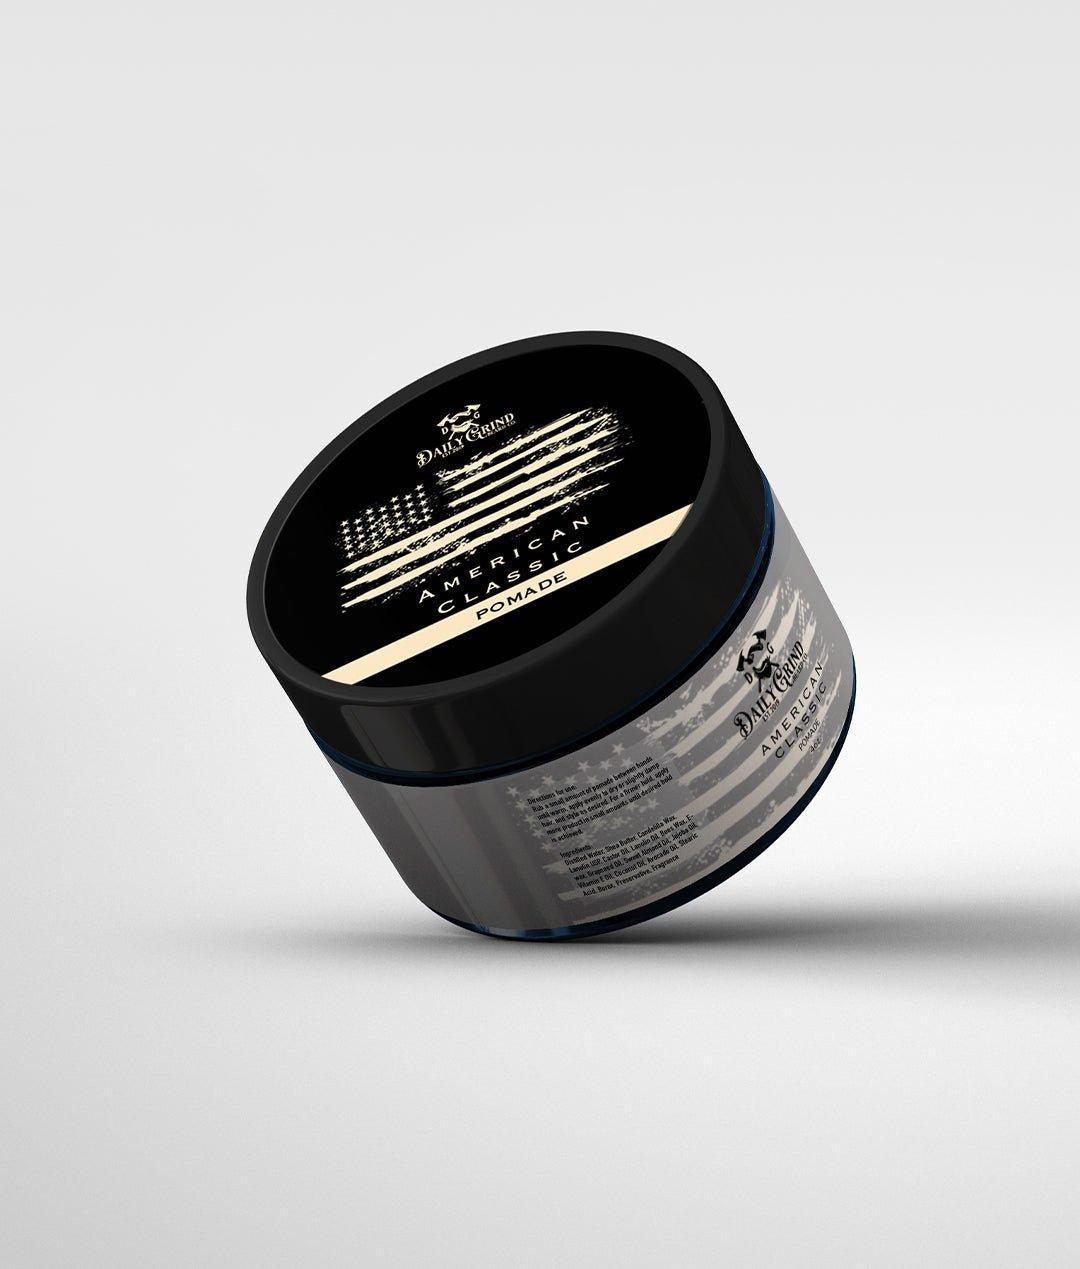 Hair Pomade - Hair Products for Men - Daily Grind